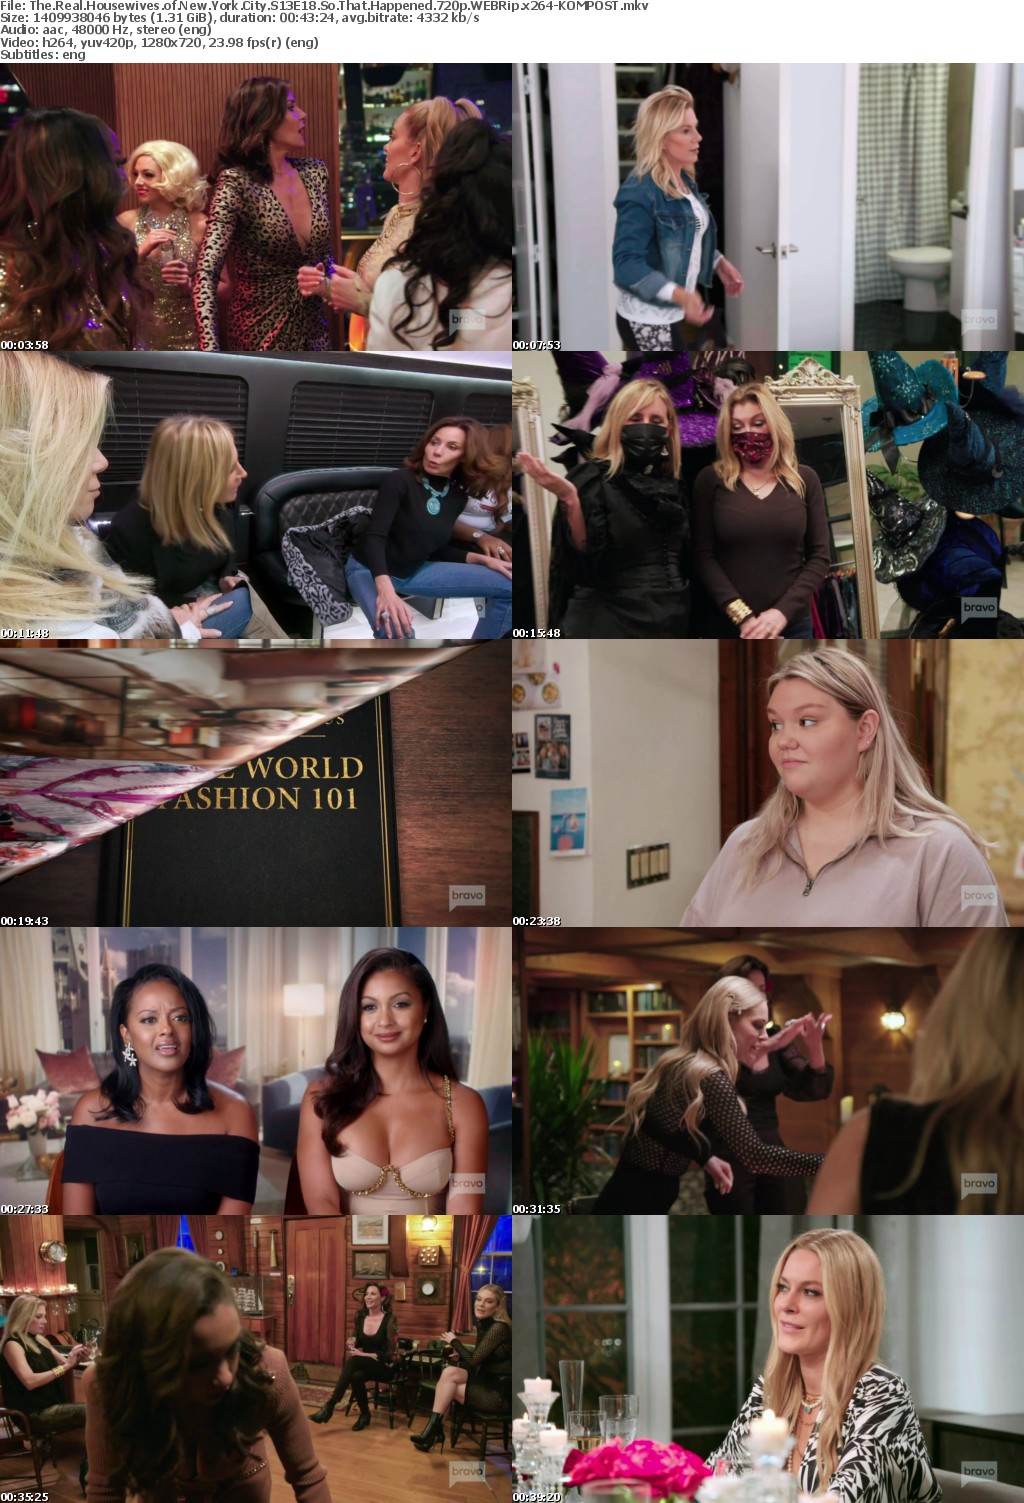 The Real Housewives of New York City S13E18 So That Happened 720p WEBRip x264-KOMPOST